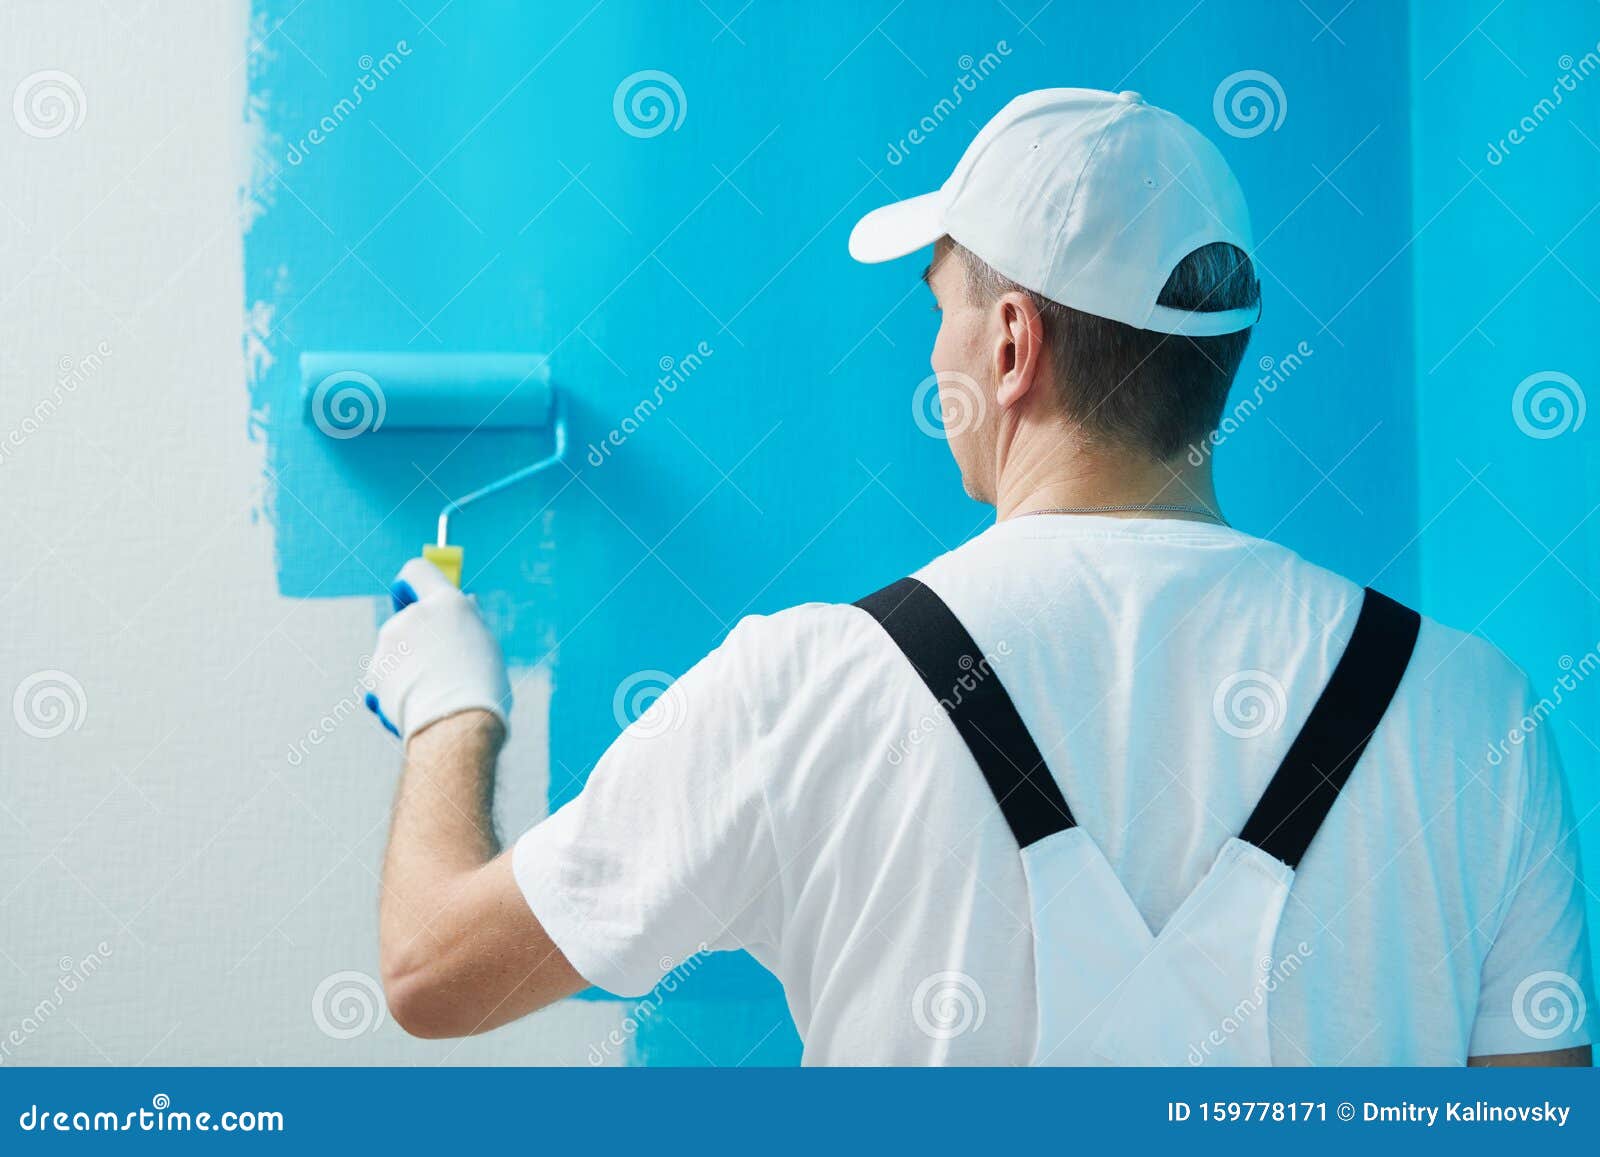 painter worker with roller painting wall surface into color